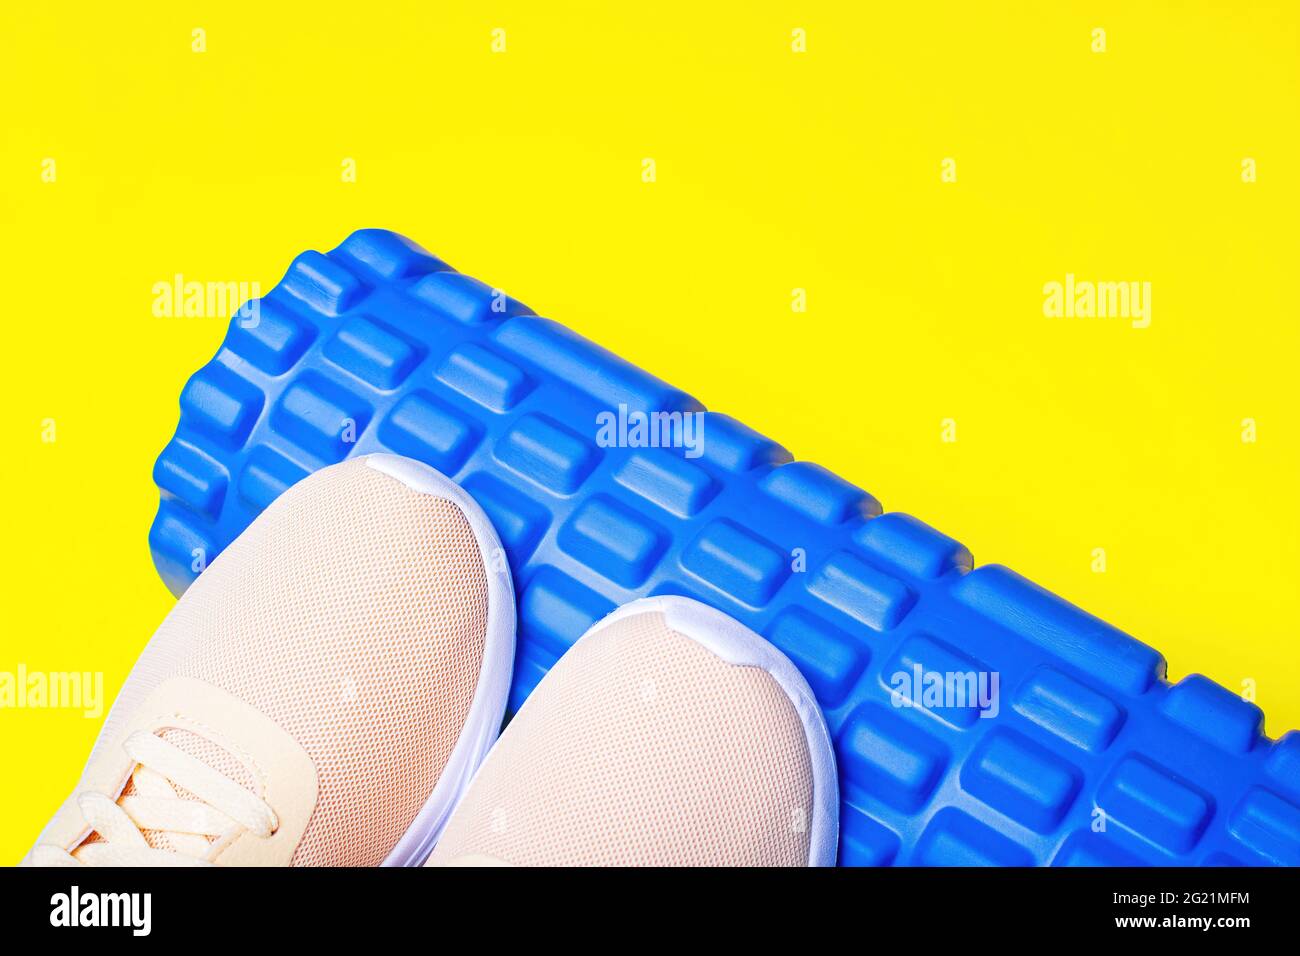 Peach sneakers and foam massage roller on yellow background. Massage roll for relieving tension in the legs. Stock Photo